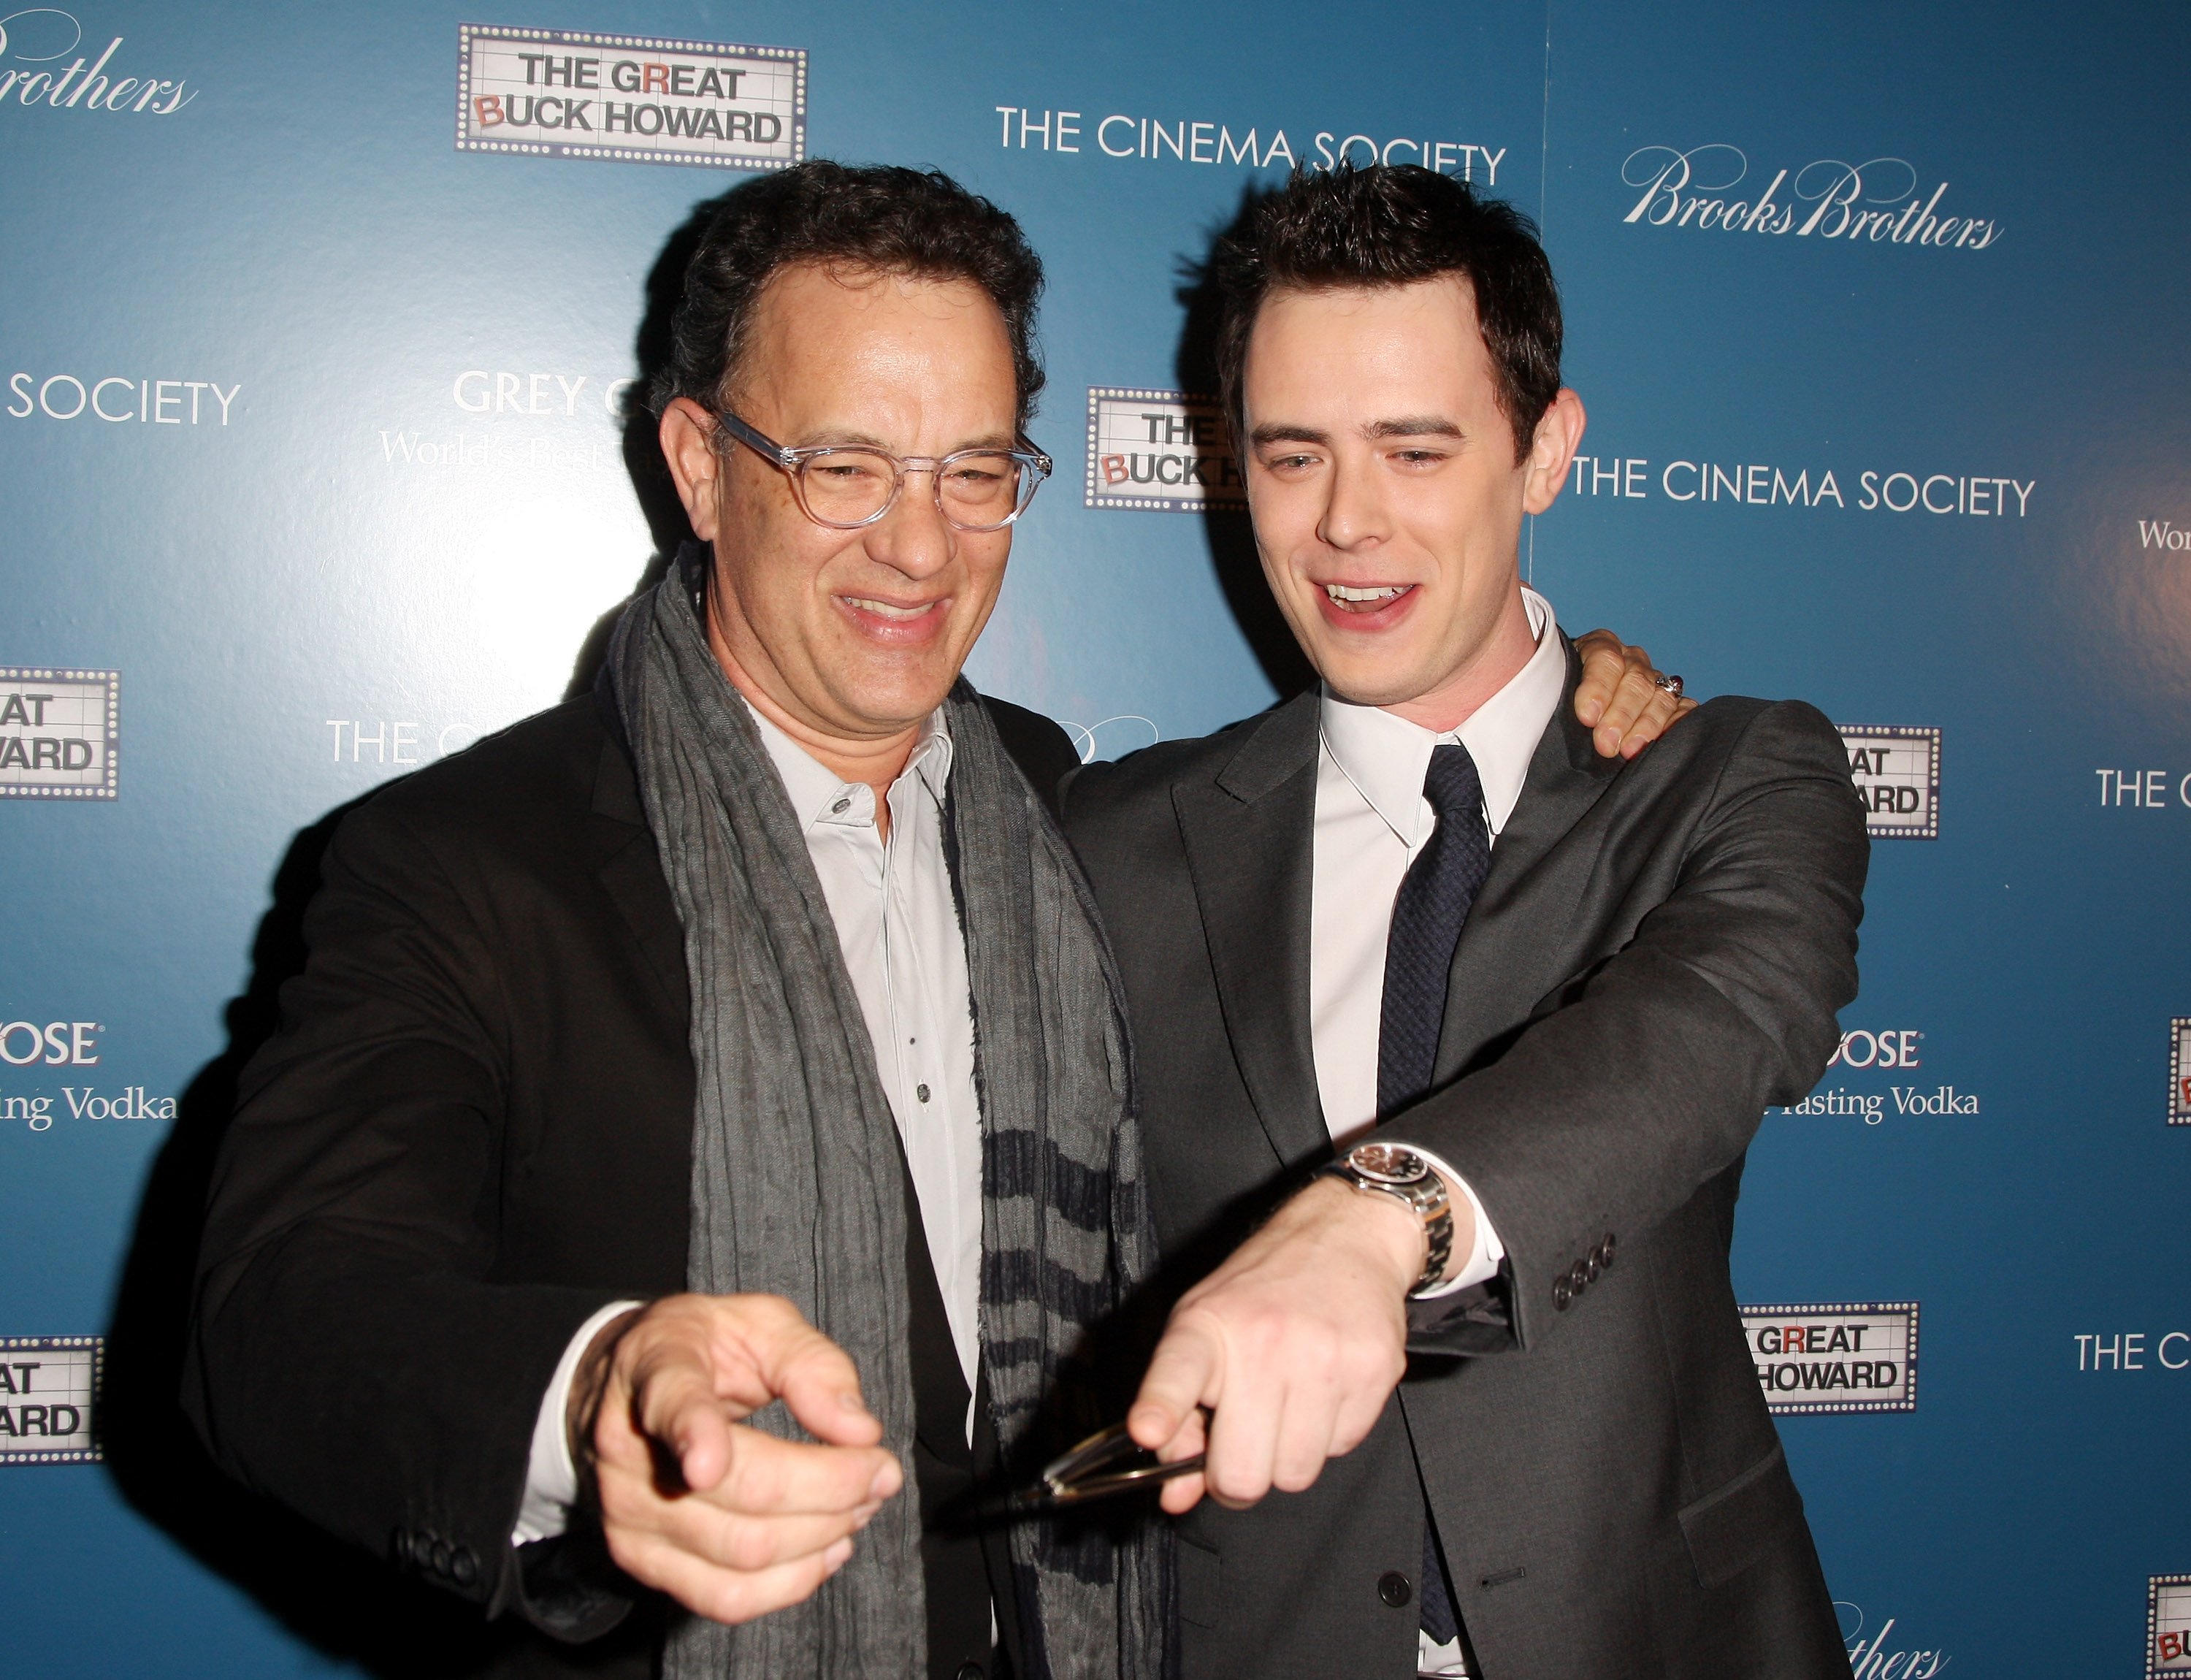 Actors Tom Hanks and Colin Hanks attend The Cinema Society and Brooks Brothers screening of "The Great Buck Howard" at the Tribeca Grand Screening Room on March 10, 2009 in New York City | Source: Getty Images